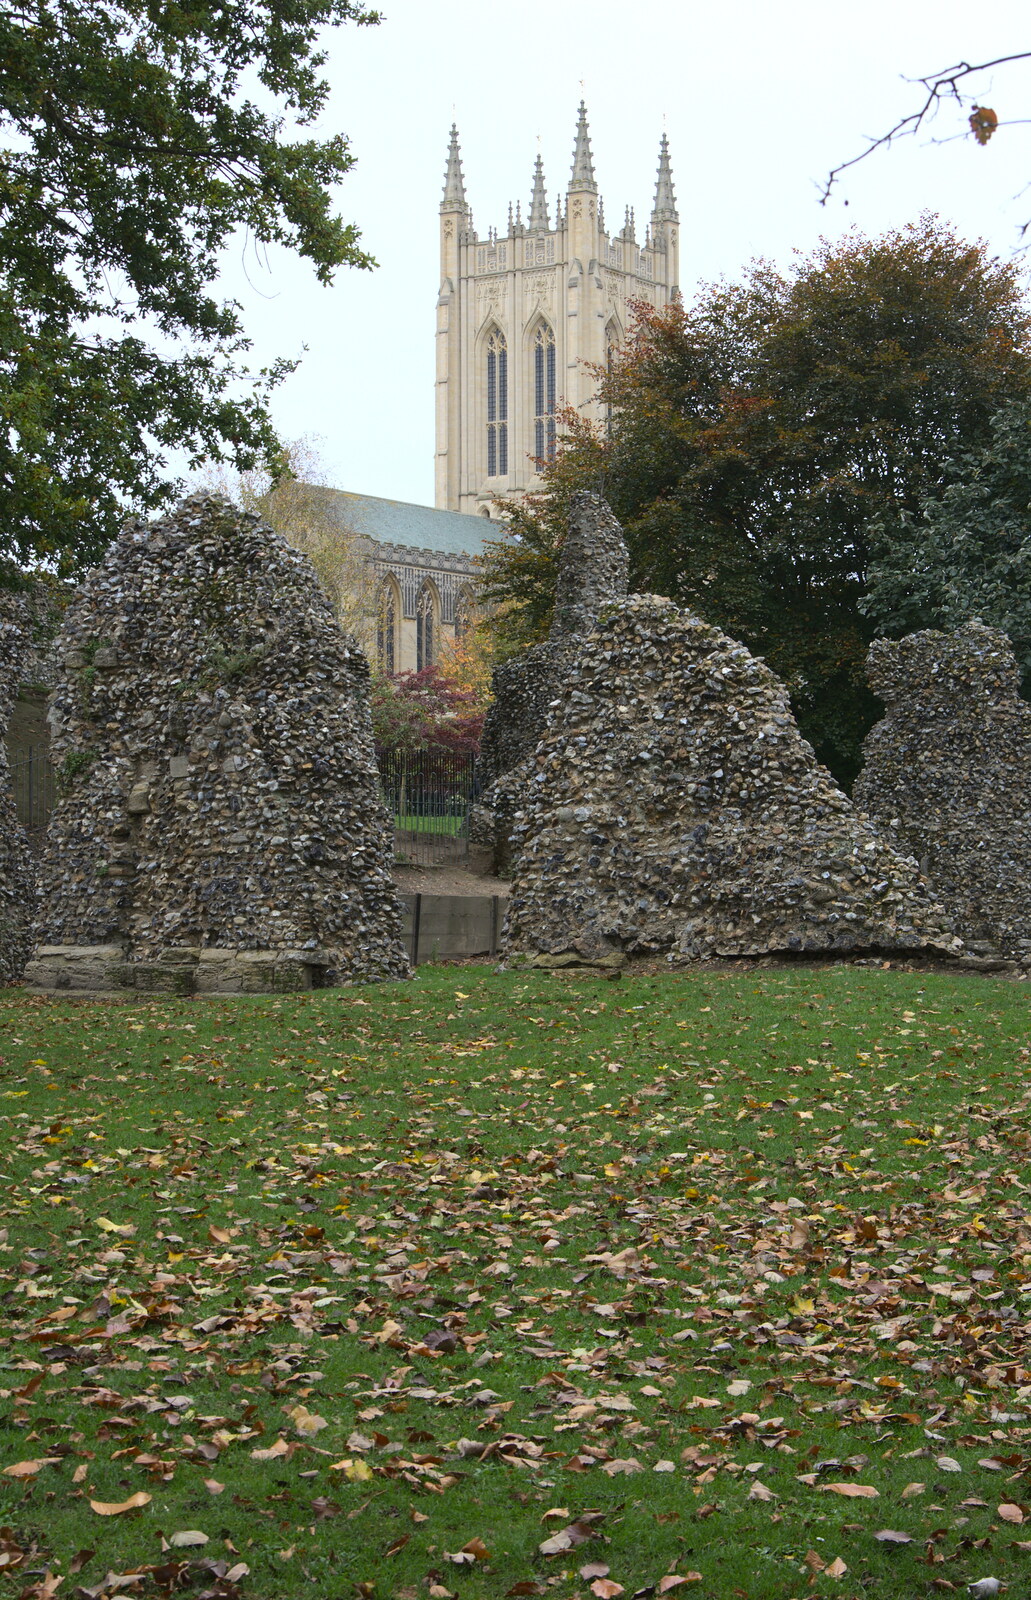 Abbey ruins from A Trip to Abbey Gardens, Bury St. Edmunds, Suffolk - 29th October 2014